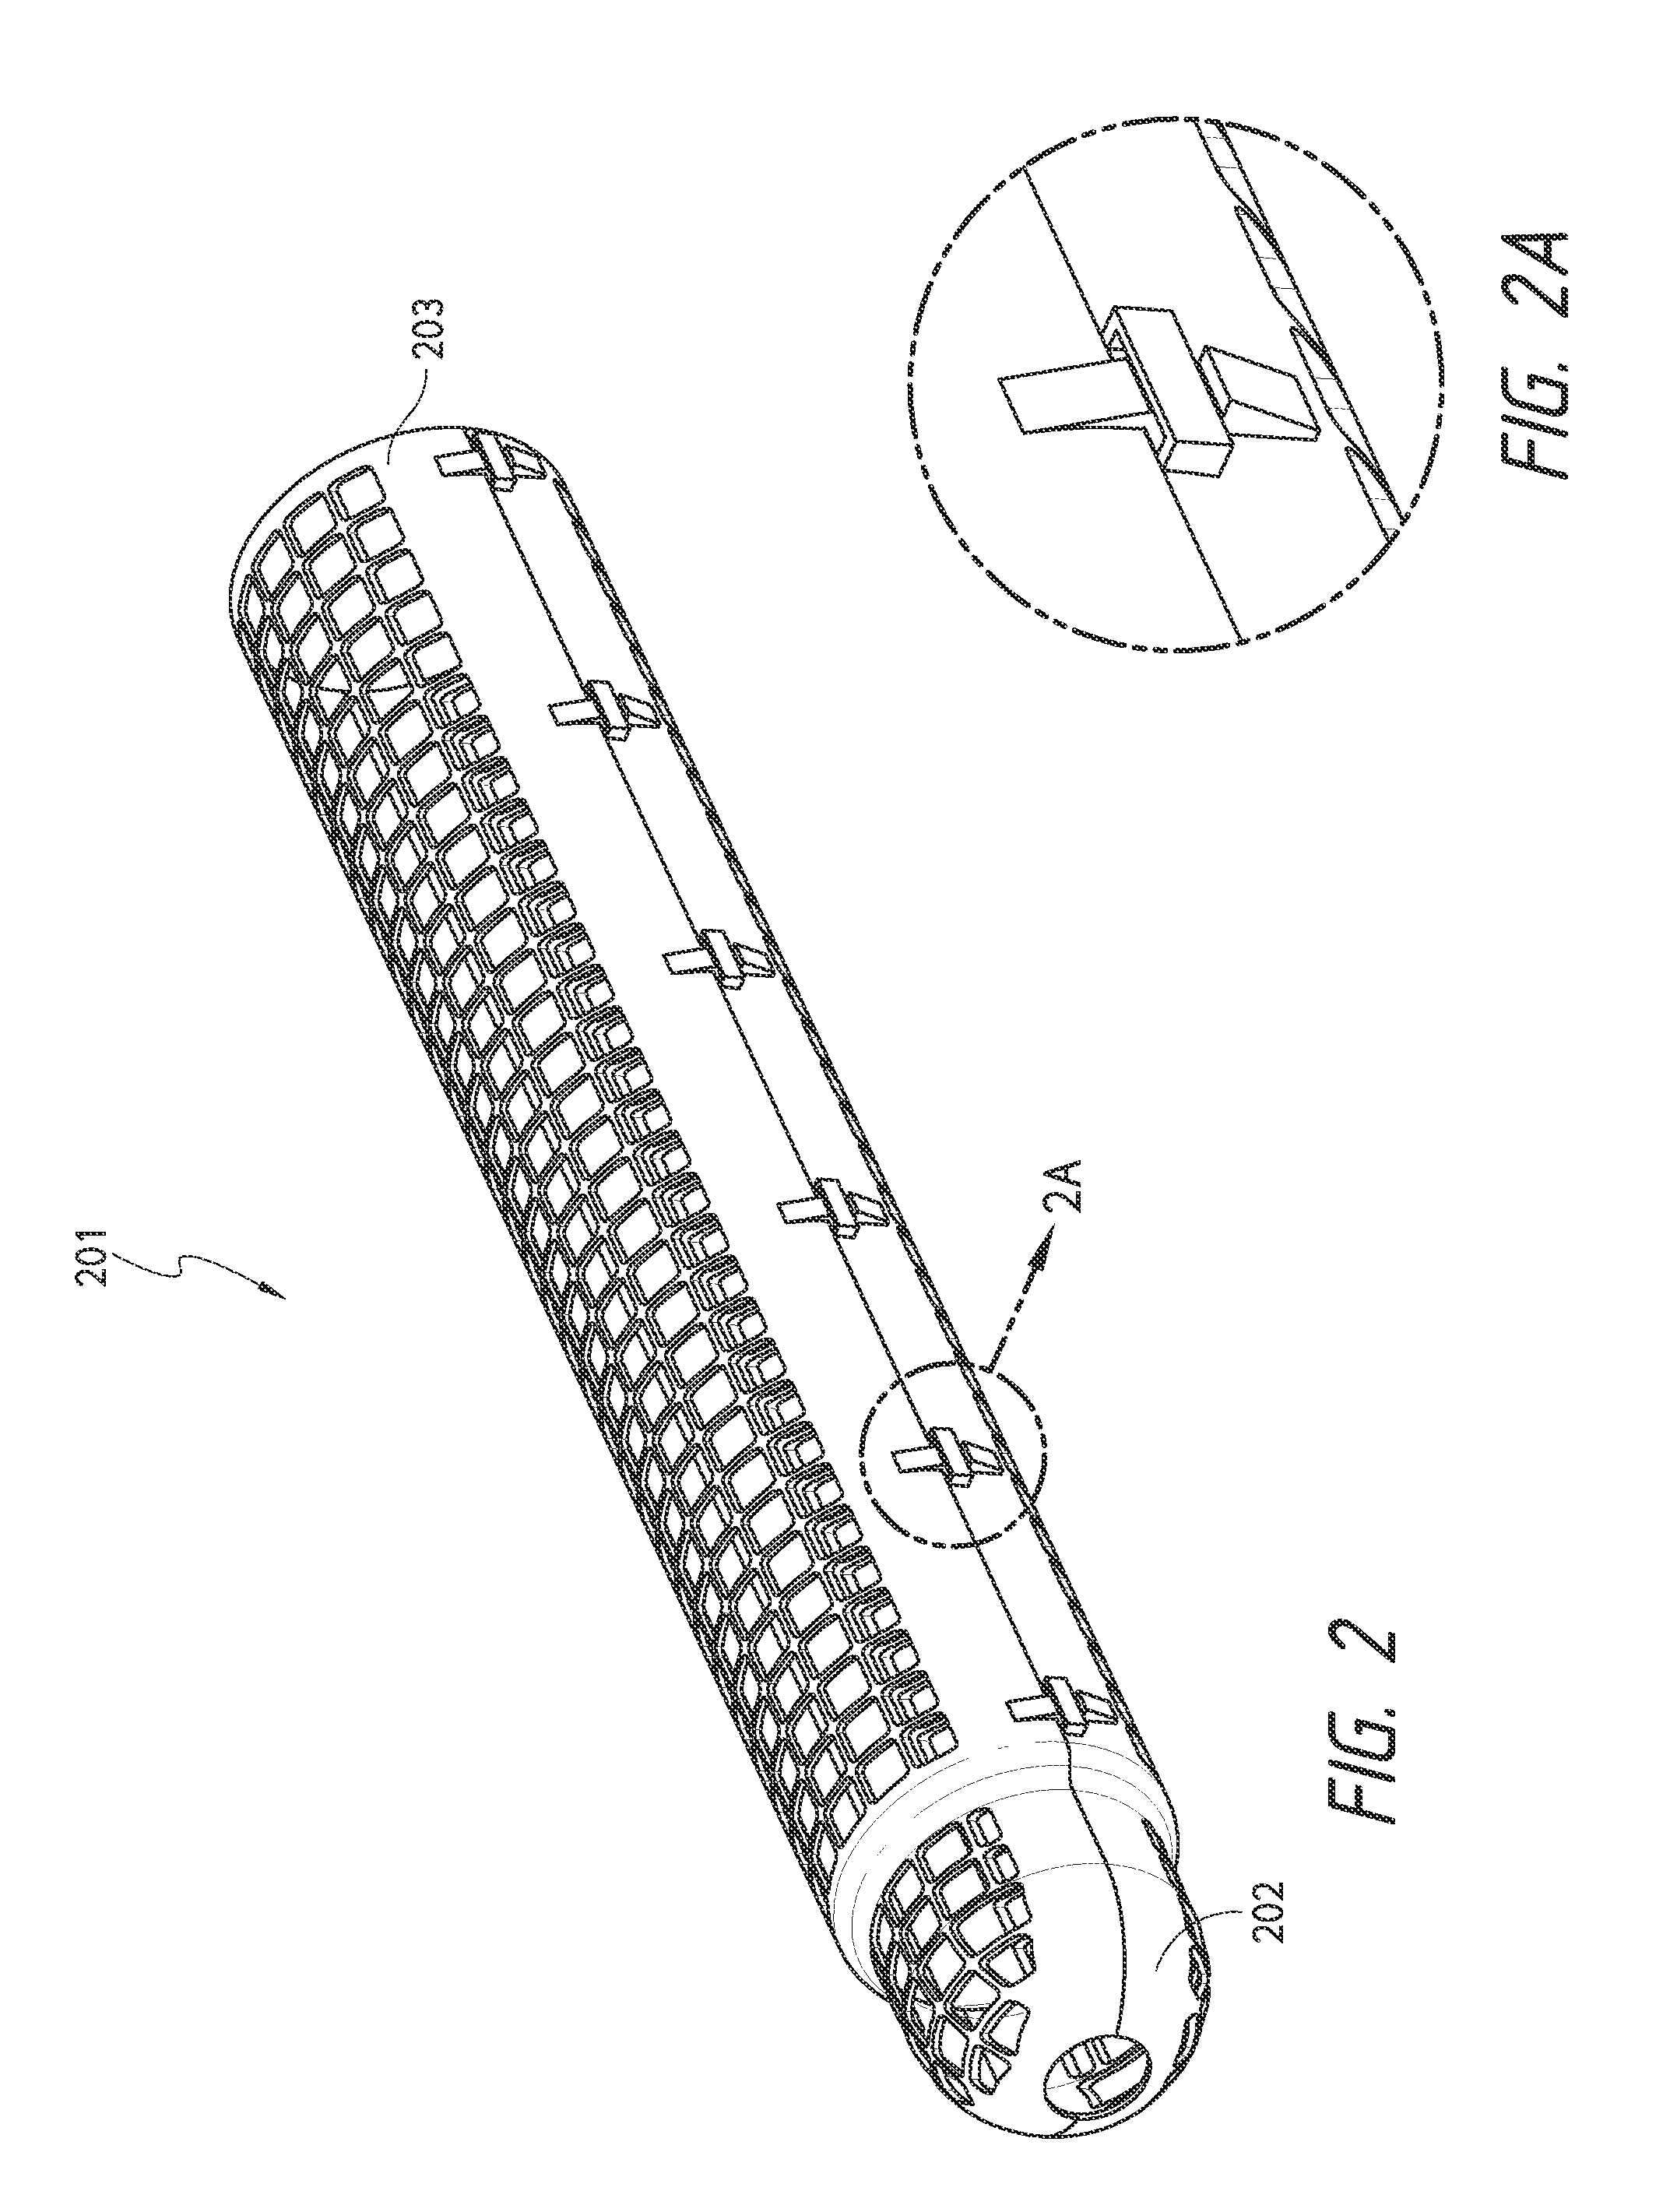 Device and methods for preventing the obstruction of gutters by leaves and other debris